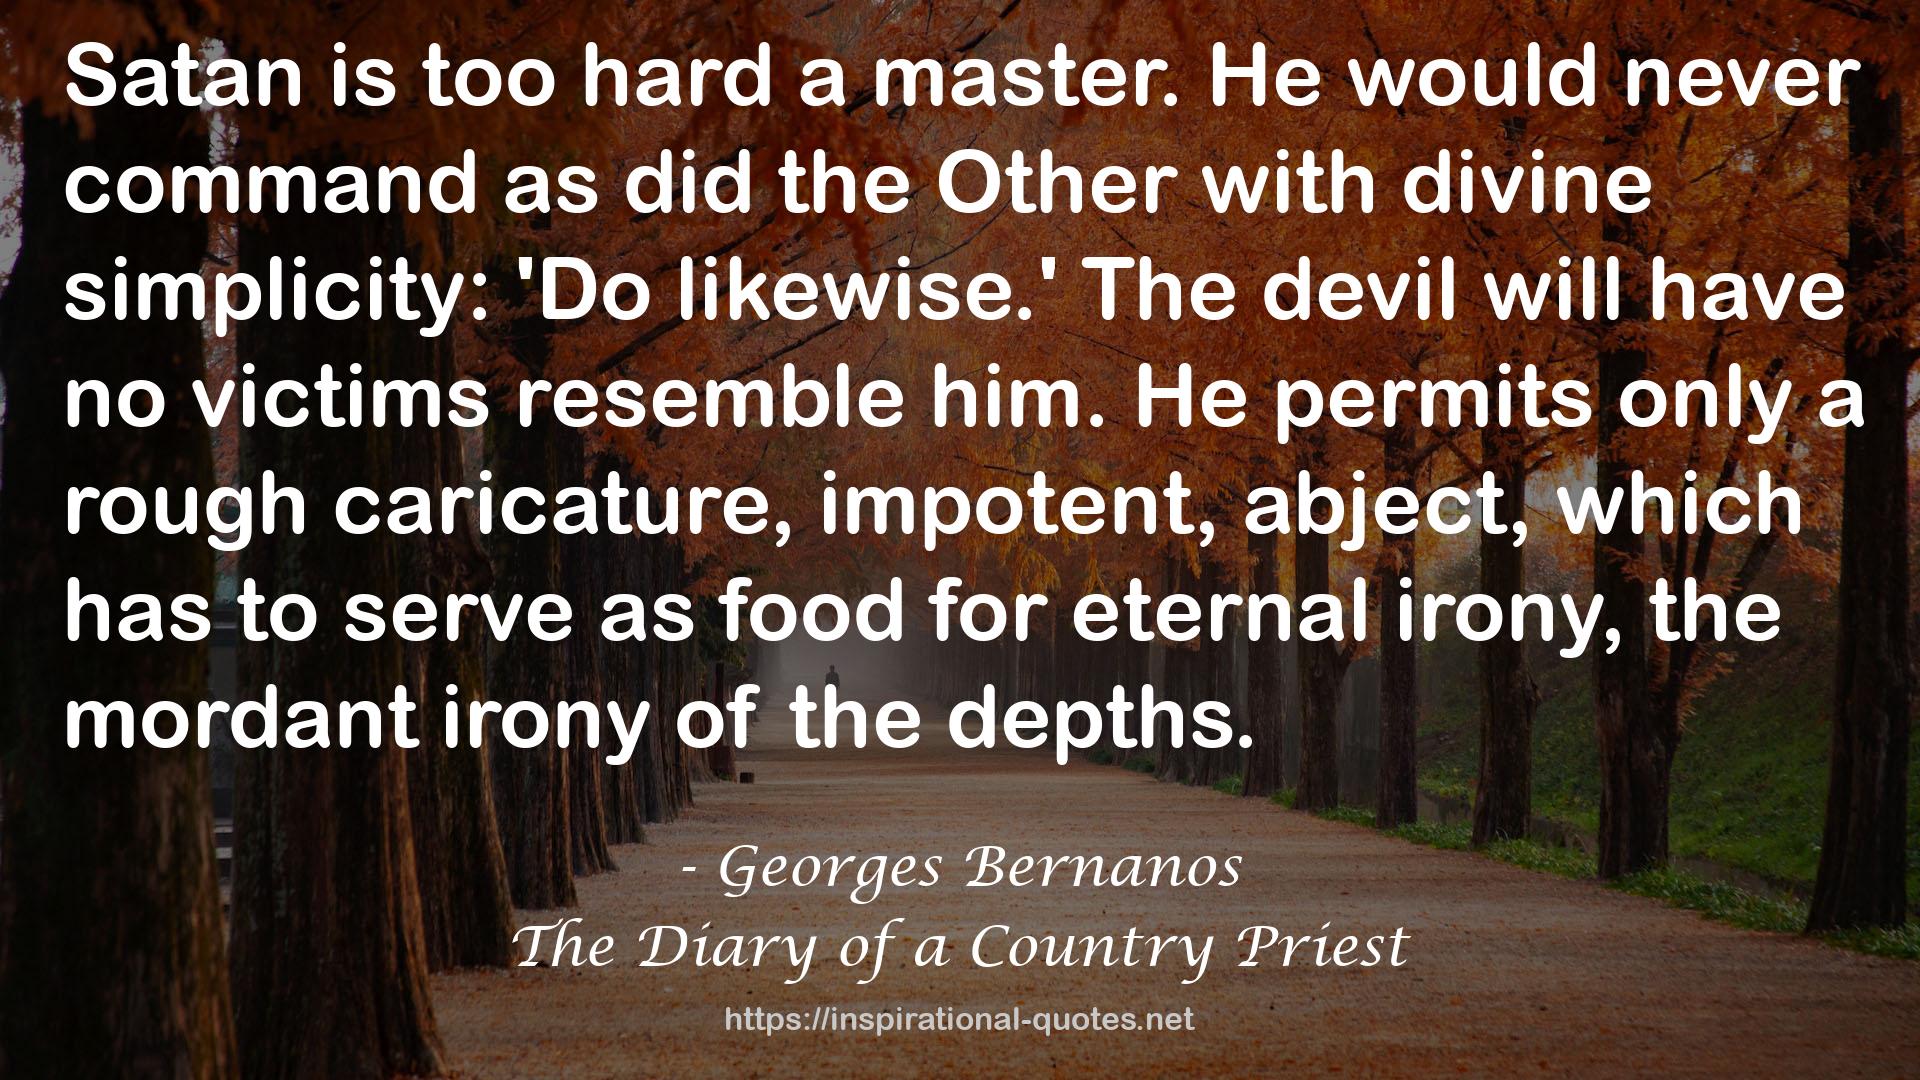 The Diary of a Country Priest QUOTES